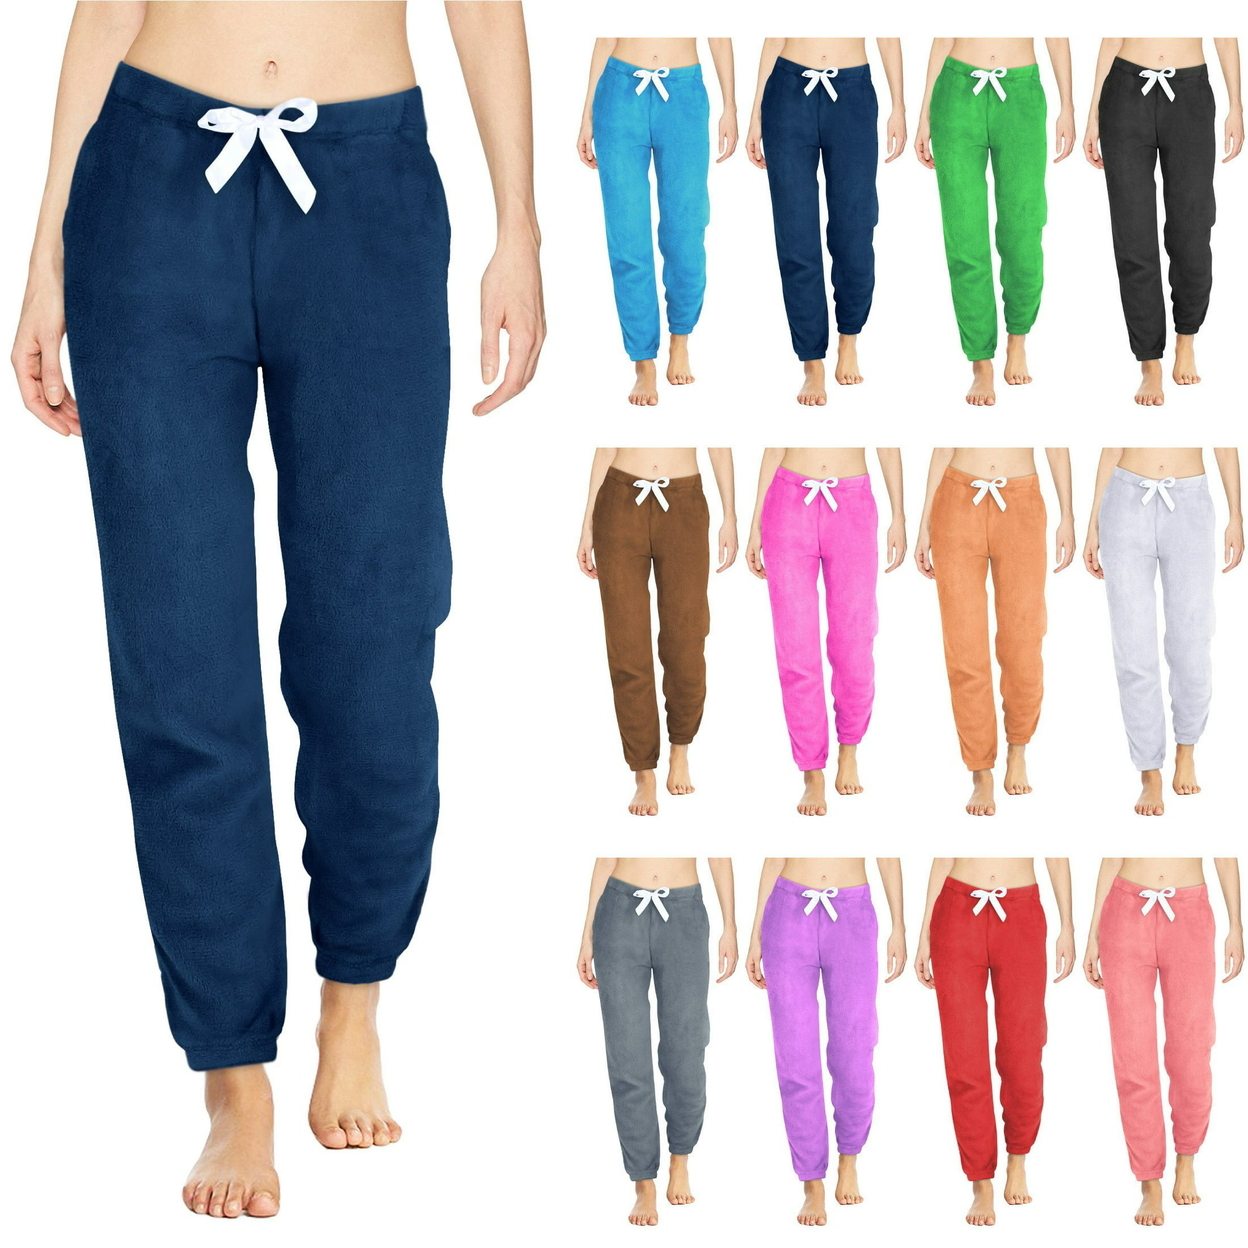 Multi-Pack: Women's Solid & Printed Ultra-Soft Comfy Stretch Micro-Fleece Pajama Lounge Pants - 1-pack, Small, Solid